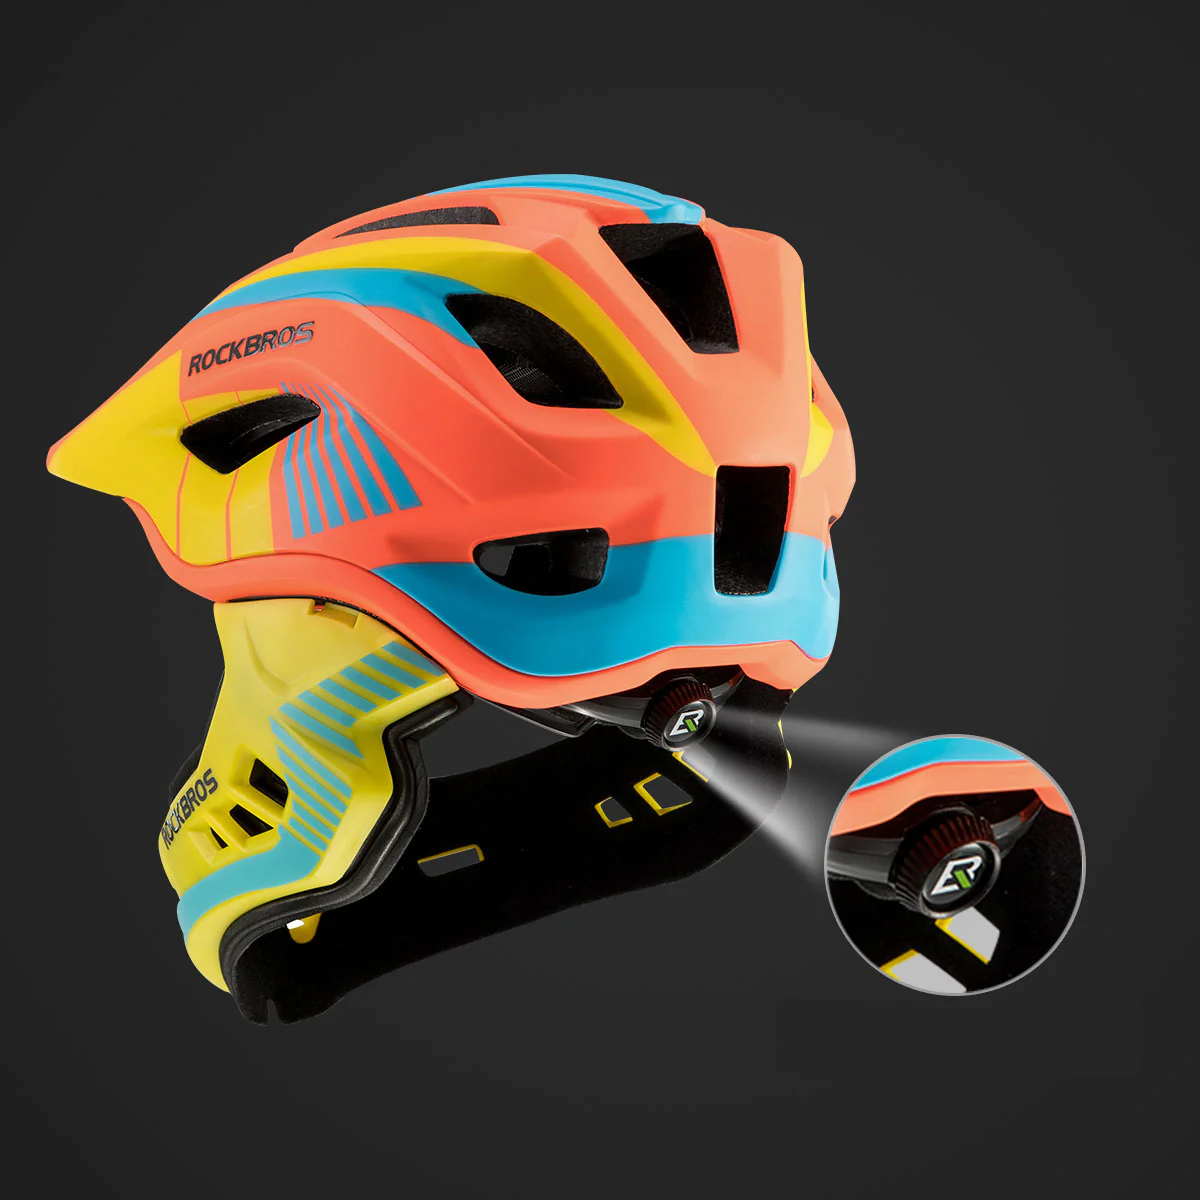 Adjustment of the Rockbros TT-32SOYB-S bicycle helmet with a detachable chin